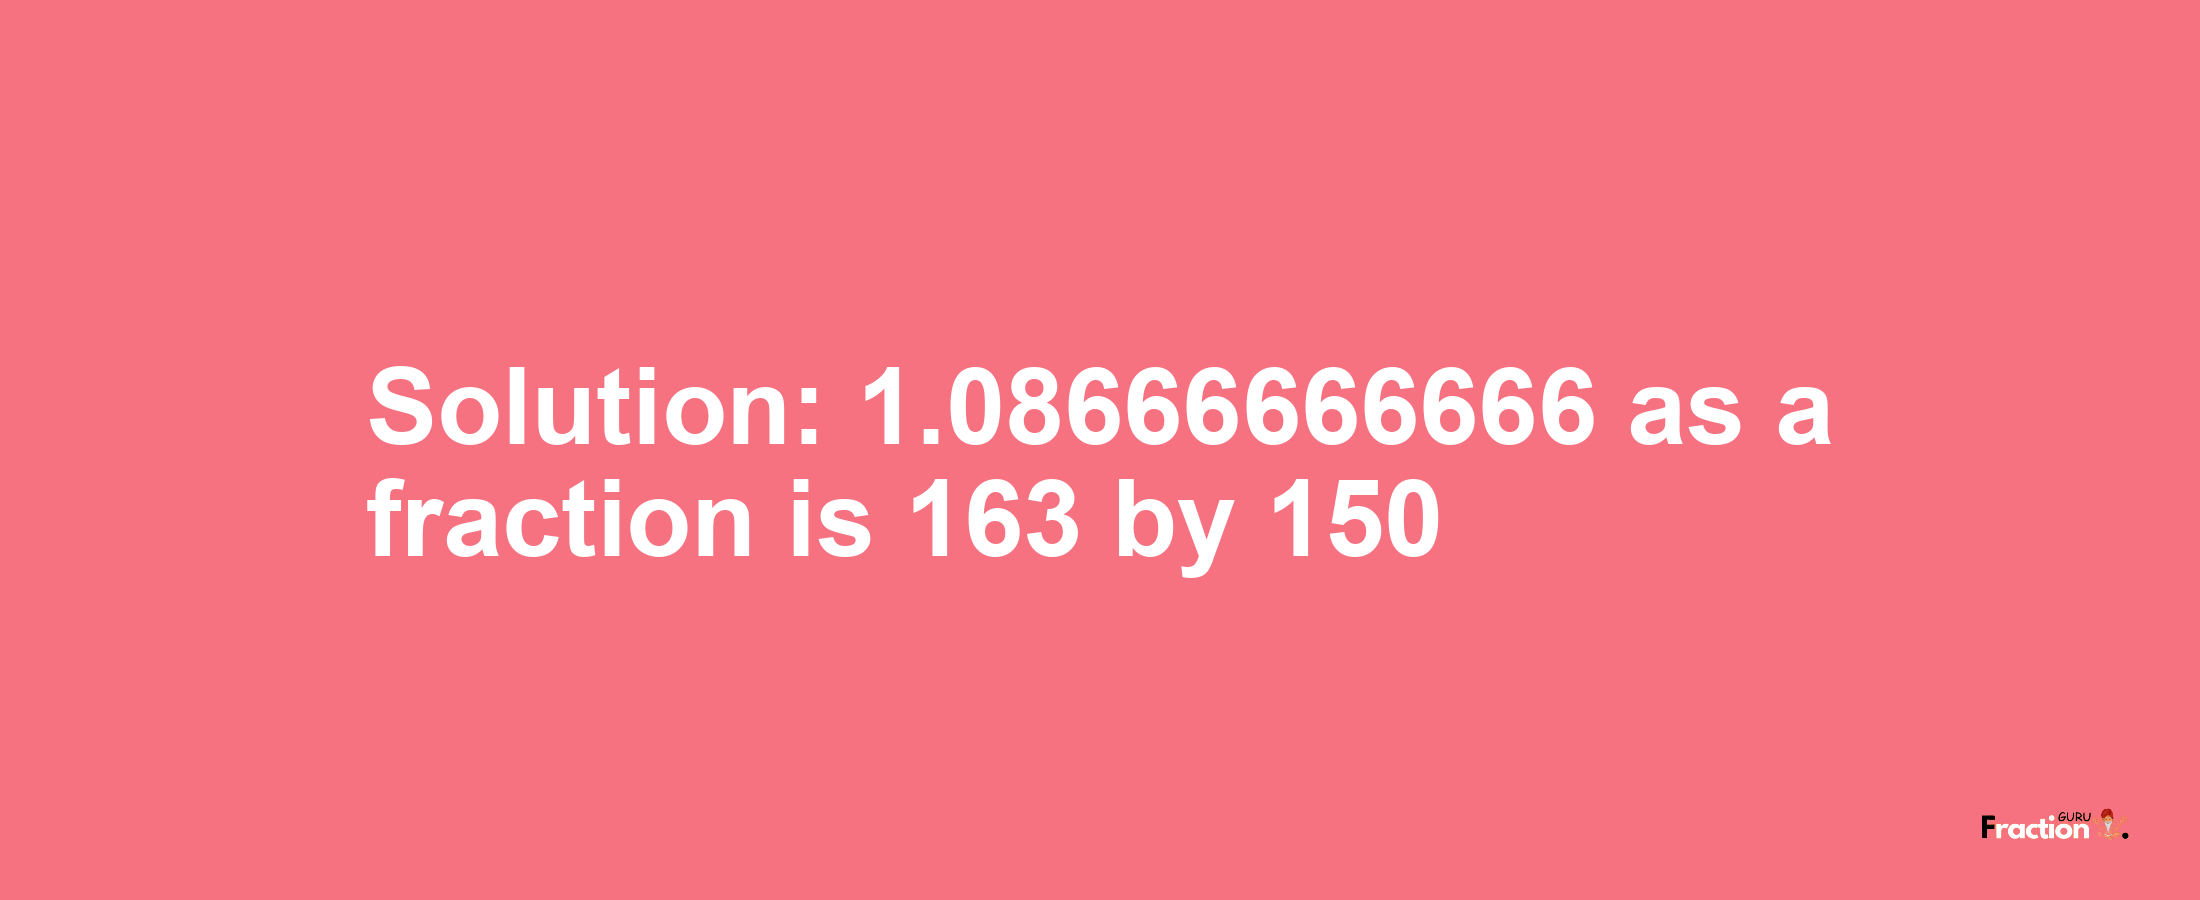 Solution:1.08666666666 as a fraction is 163/150